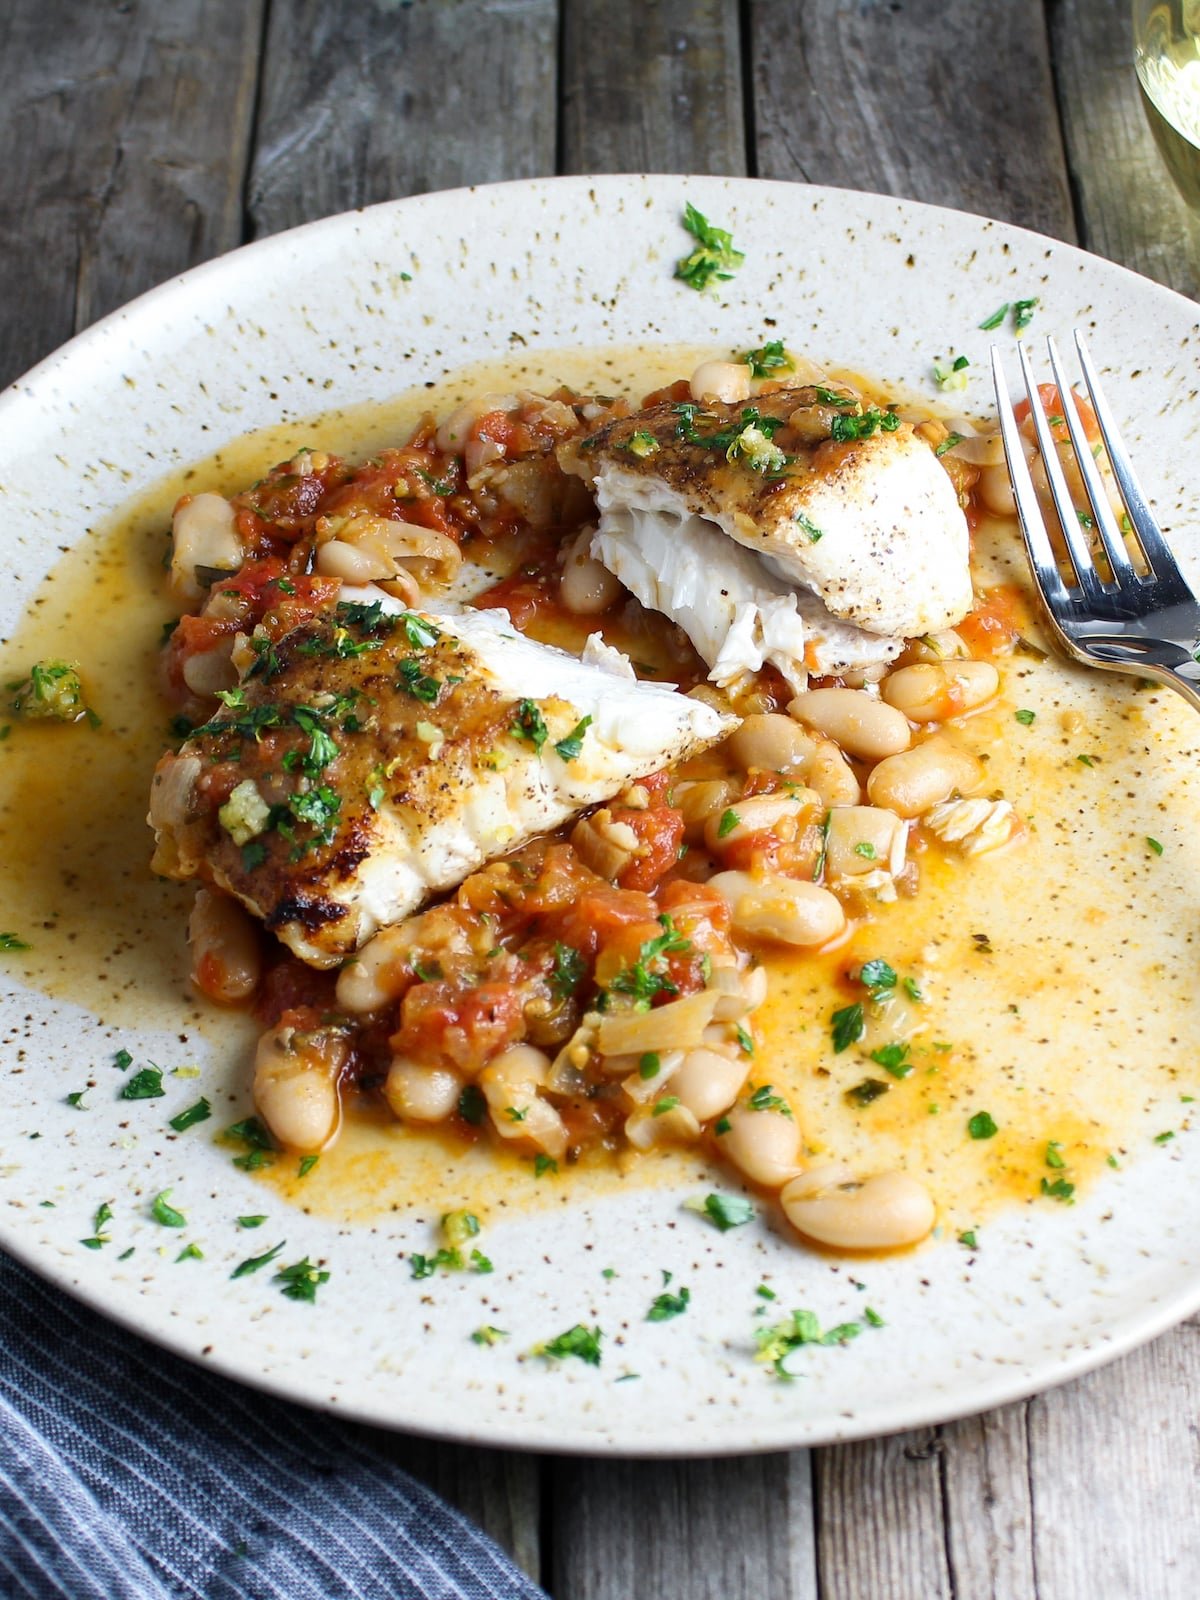 One piece of cooked halibut cut in half on a plate with sautéed cannellini beans.